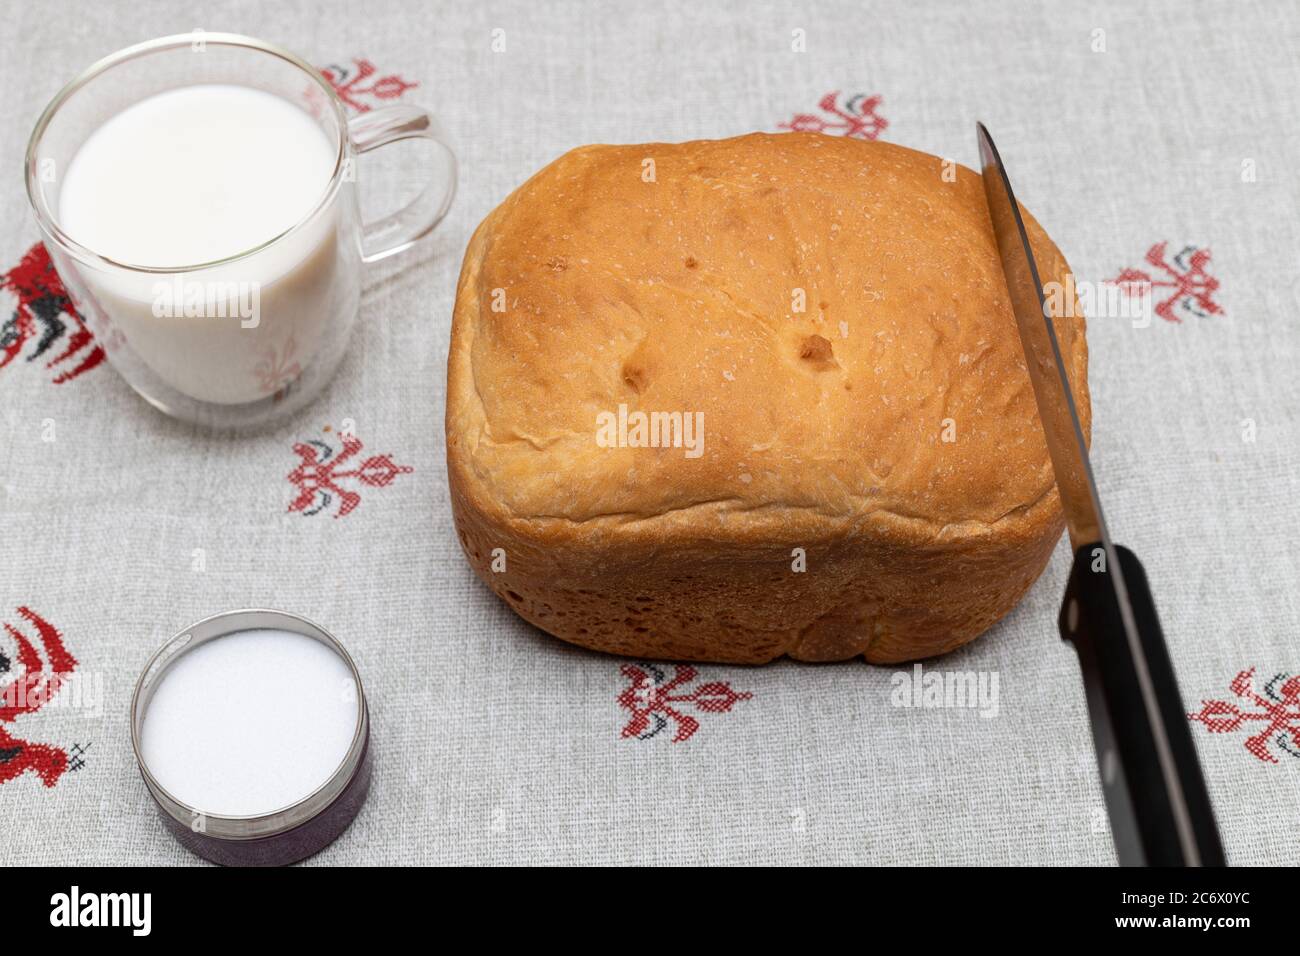 Fresh wheat bread, sald and cup of milk on a linen towel for breakfast Stock Photo